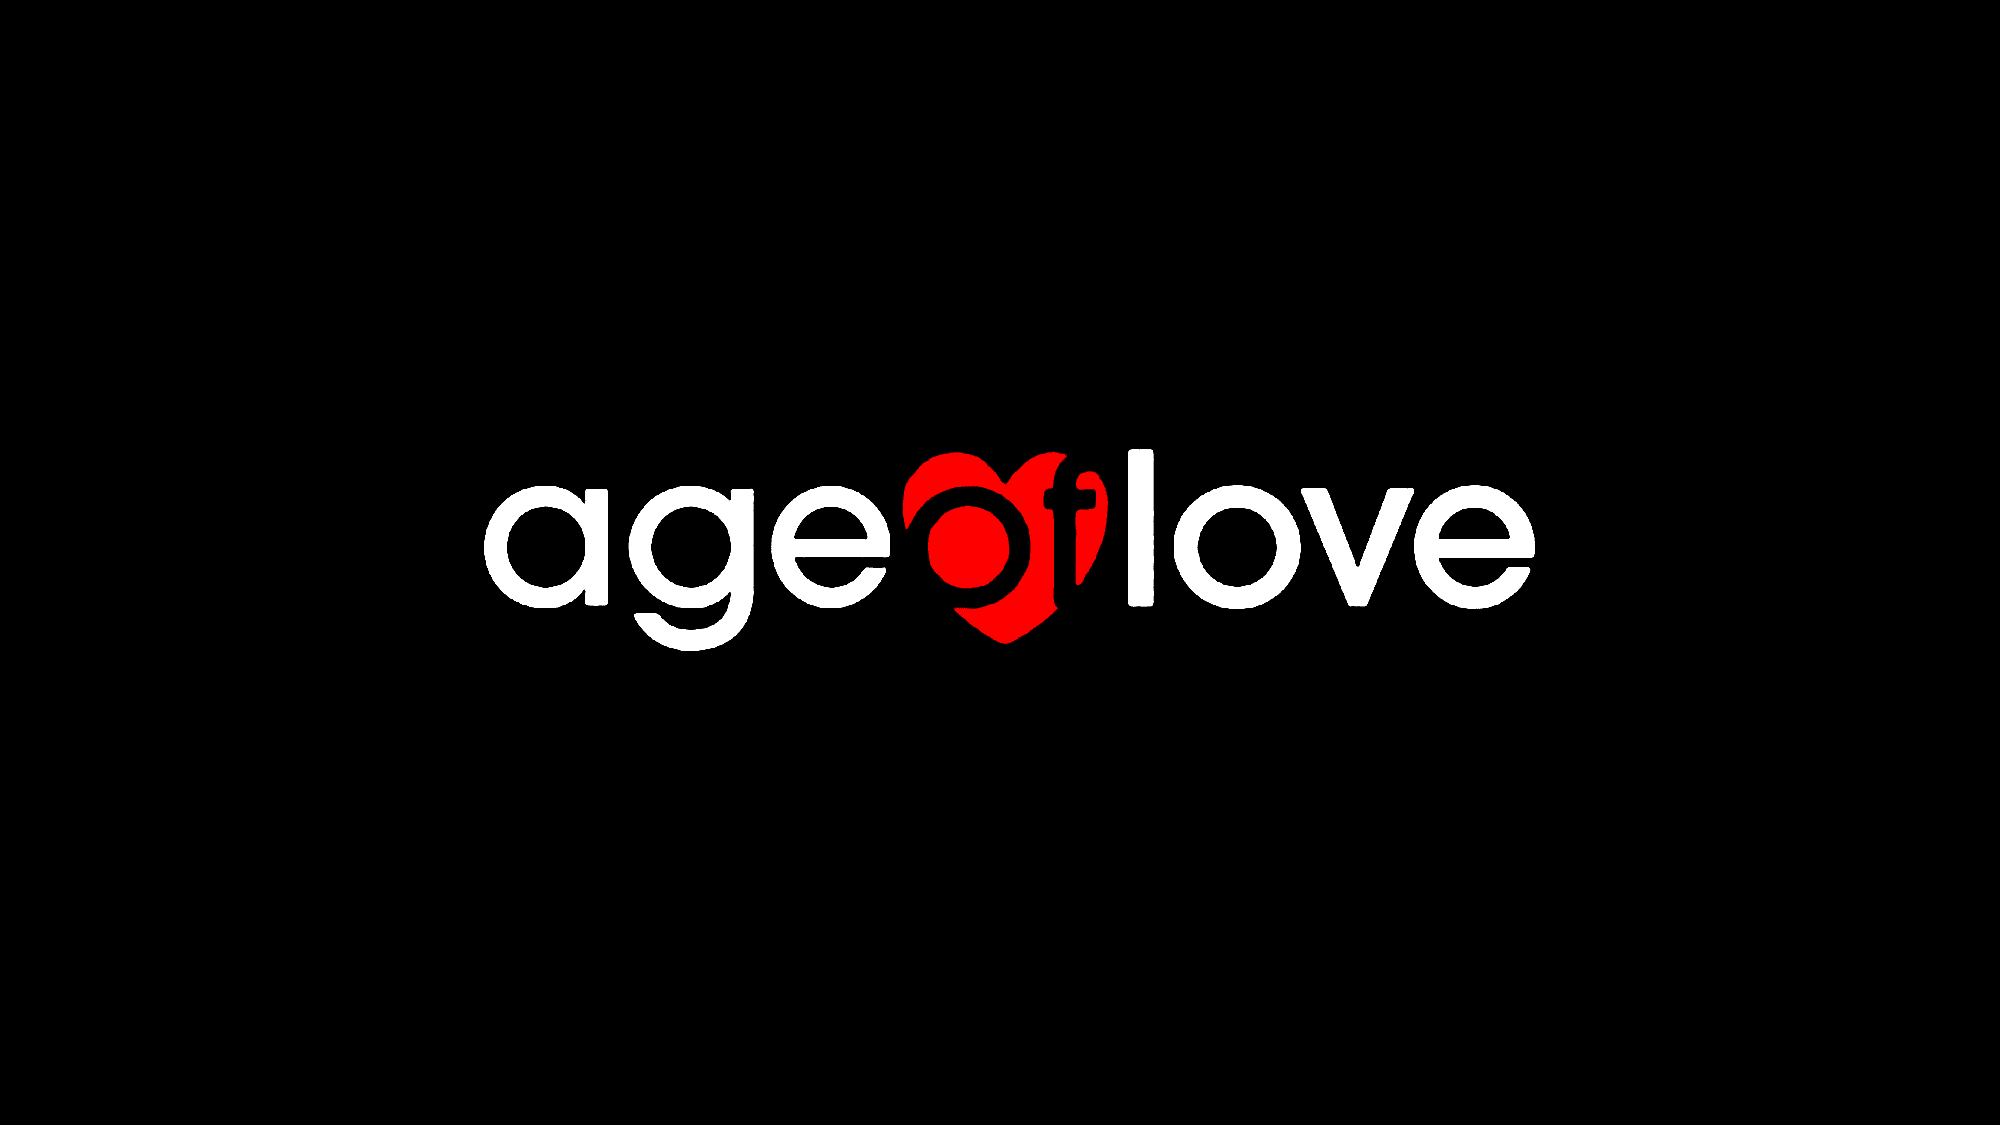 Age of Love - Details Announced For NBC's Controversial Dating Show